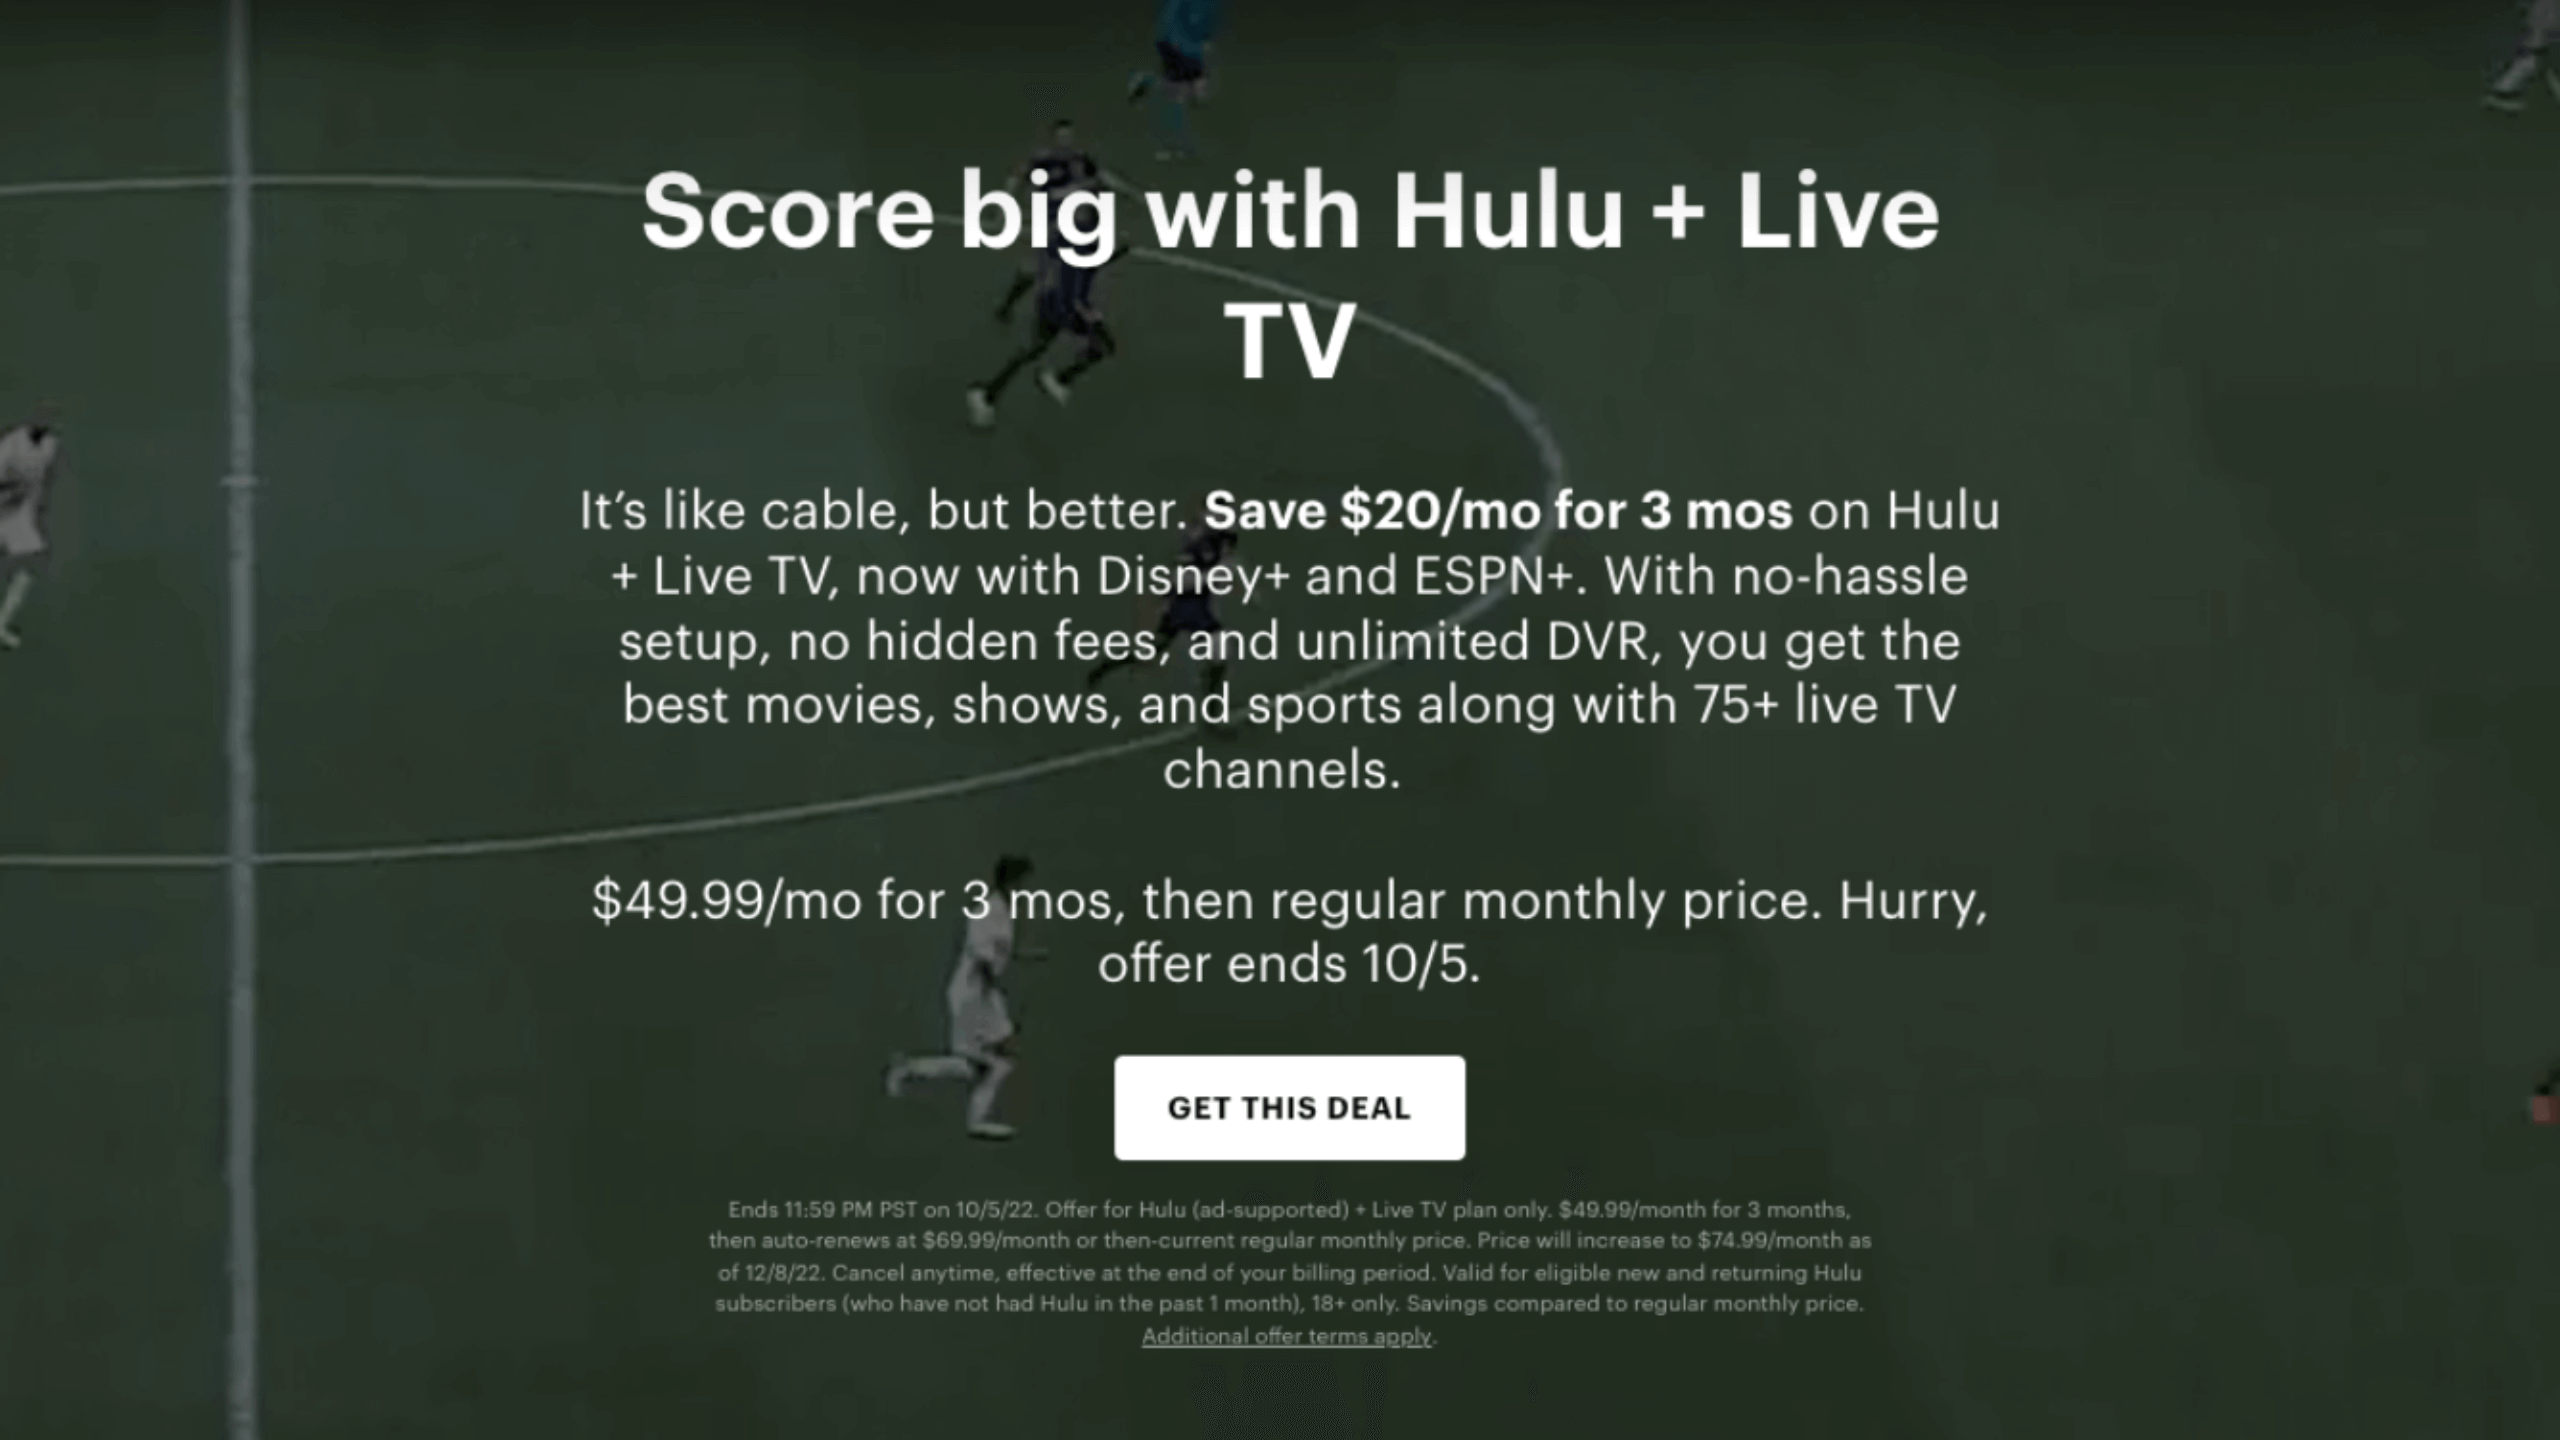 Save $60 for 3 months of Hulu + Live TV before the deal ends